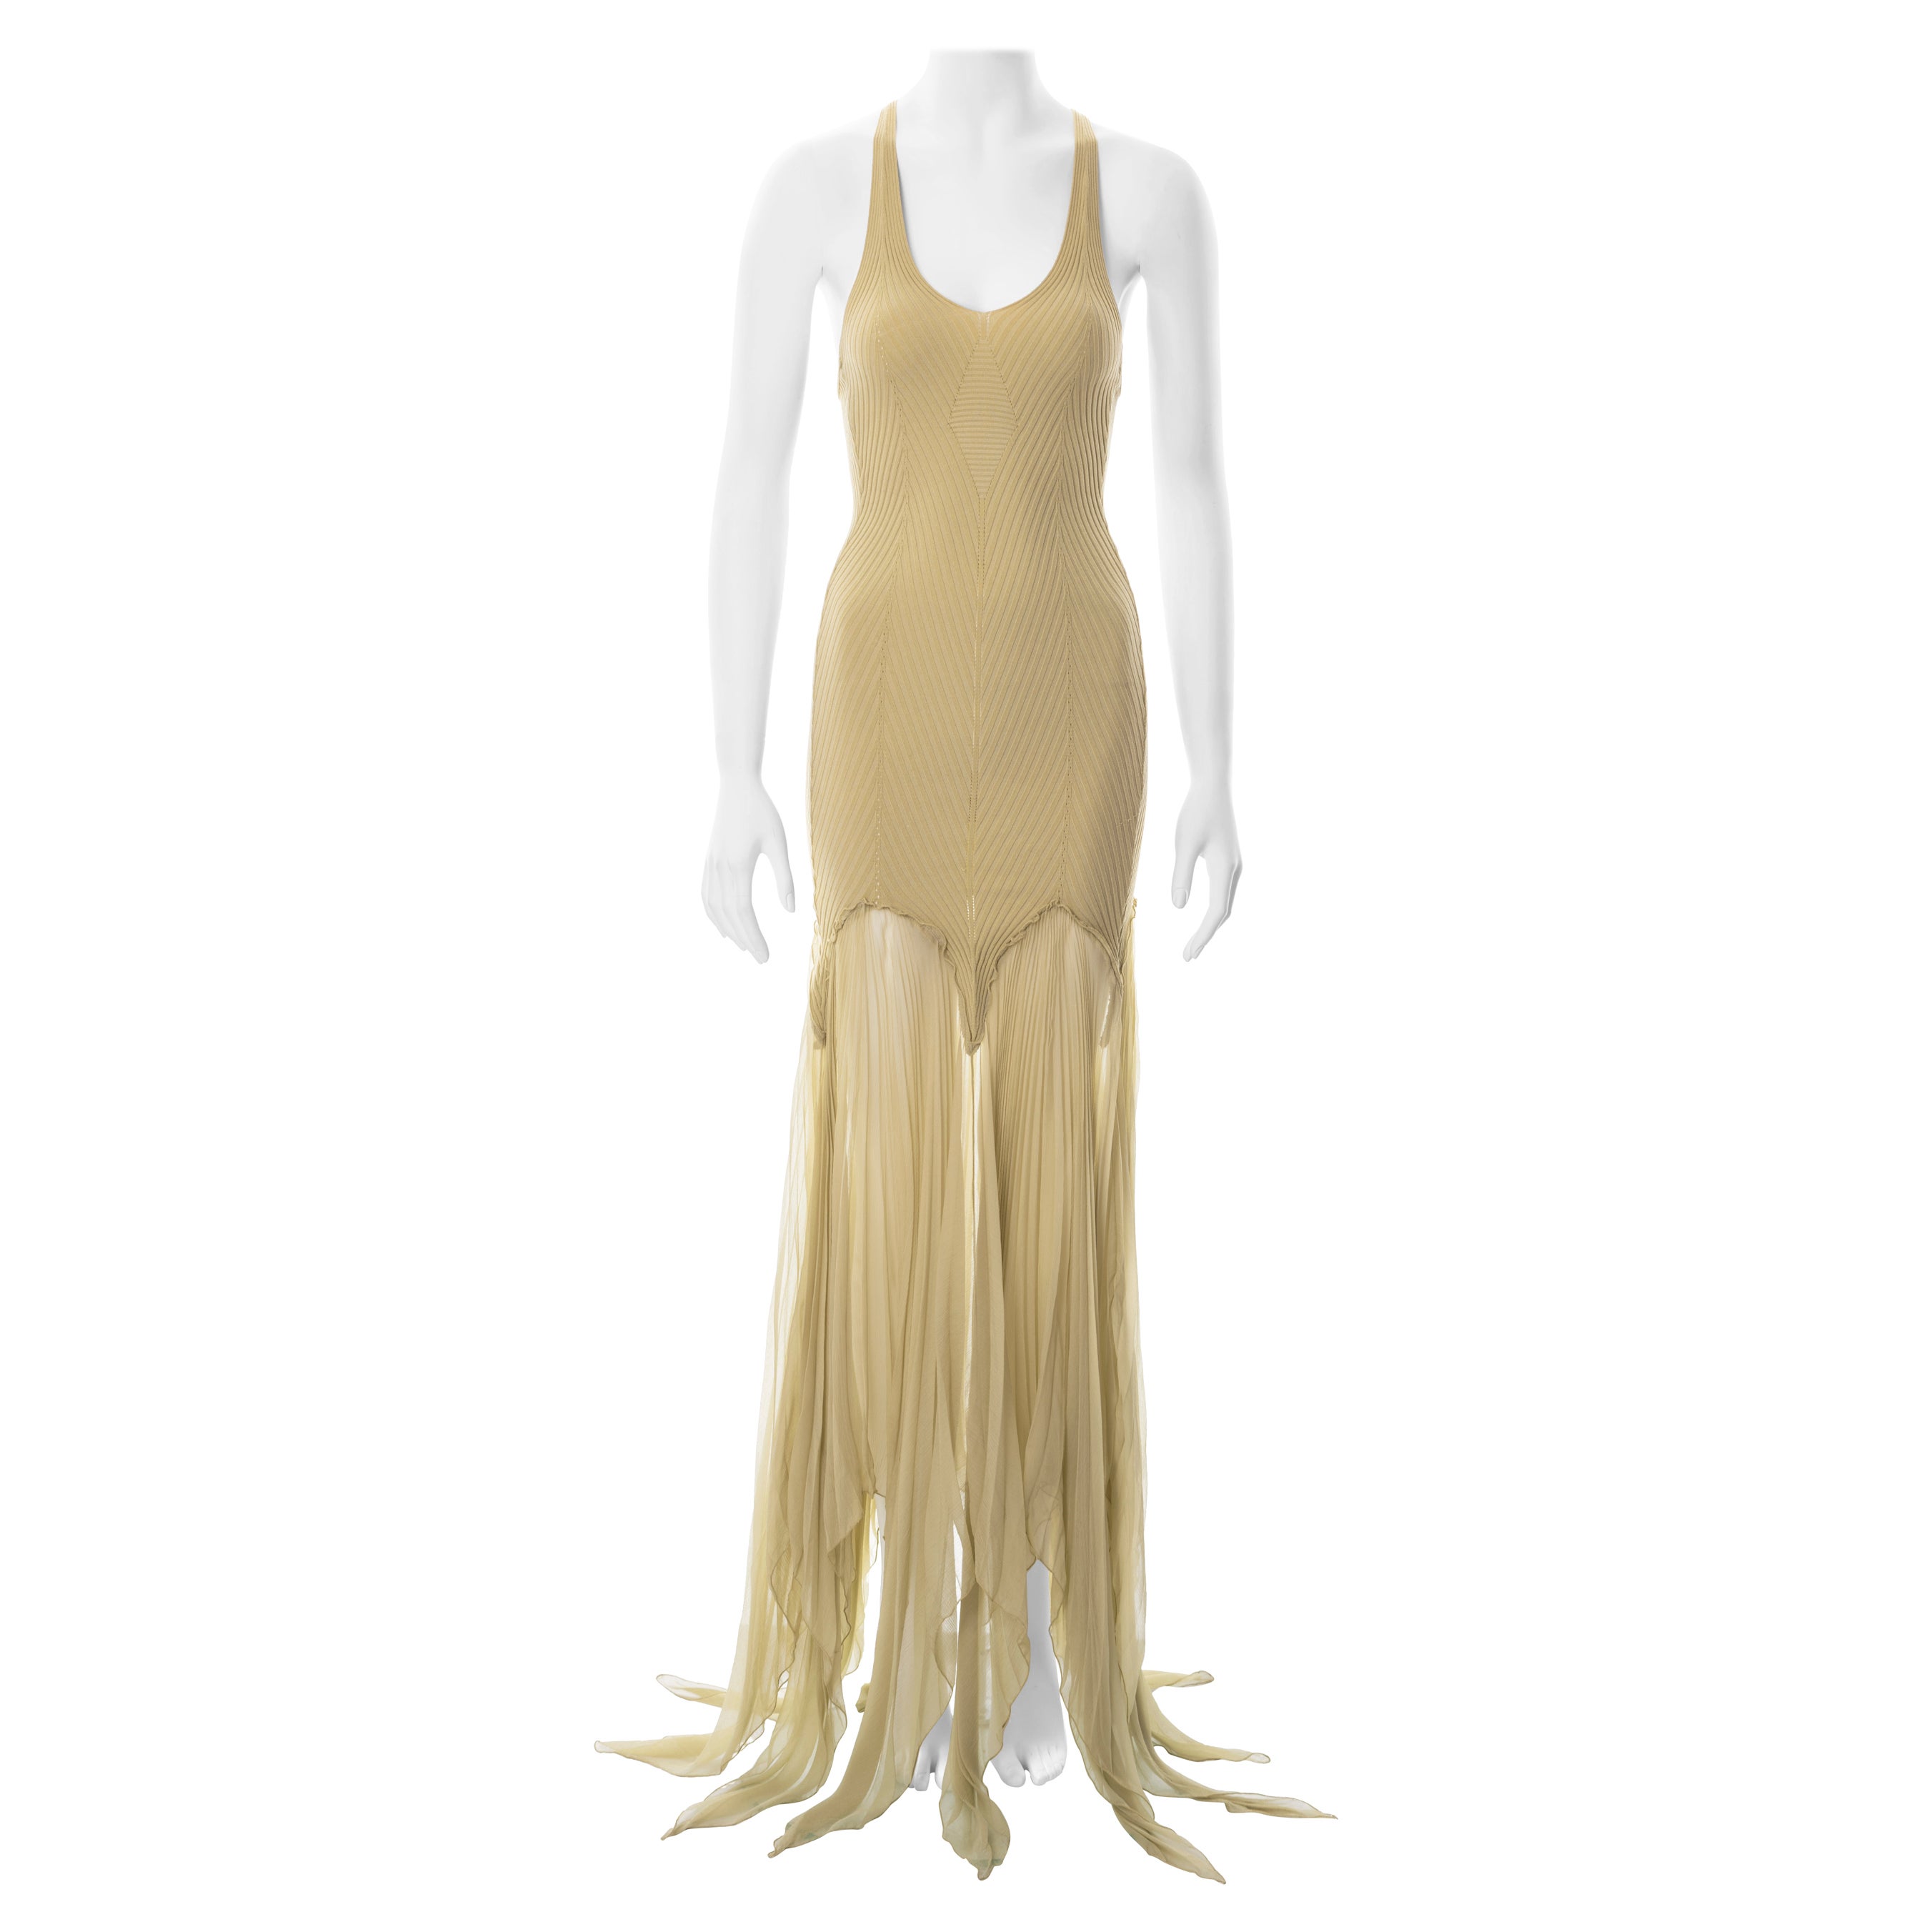 Jean Paul Gaultier ribbed knit maxi dress with accordion pleated skirt, c. 2000